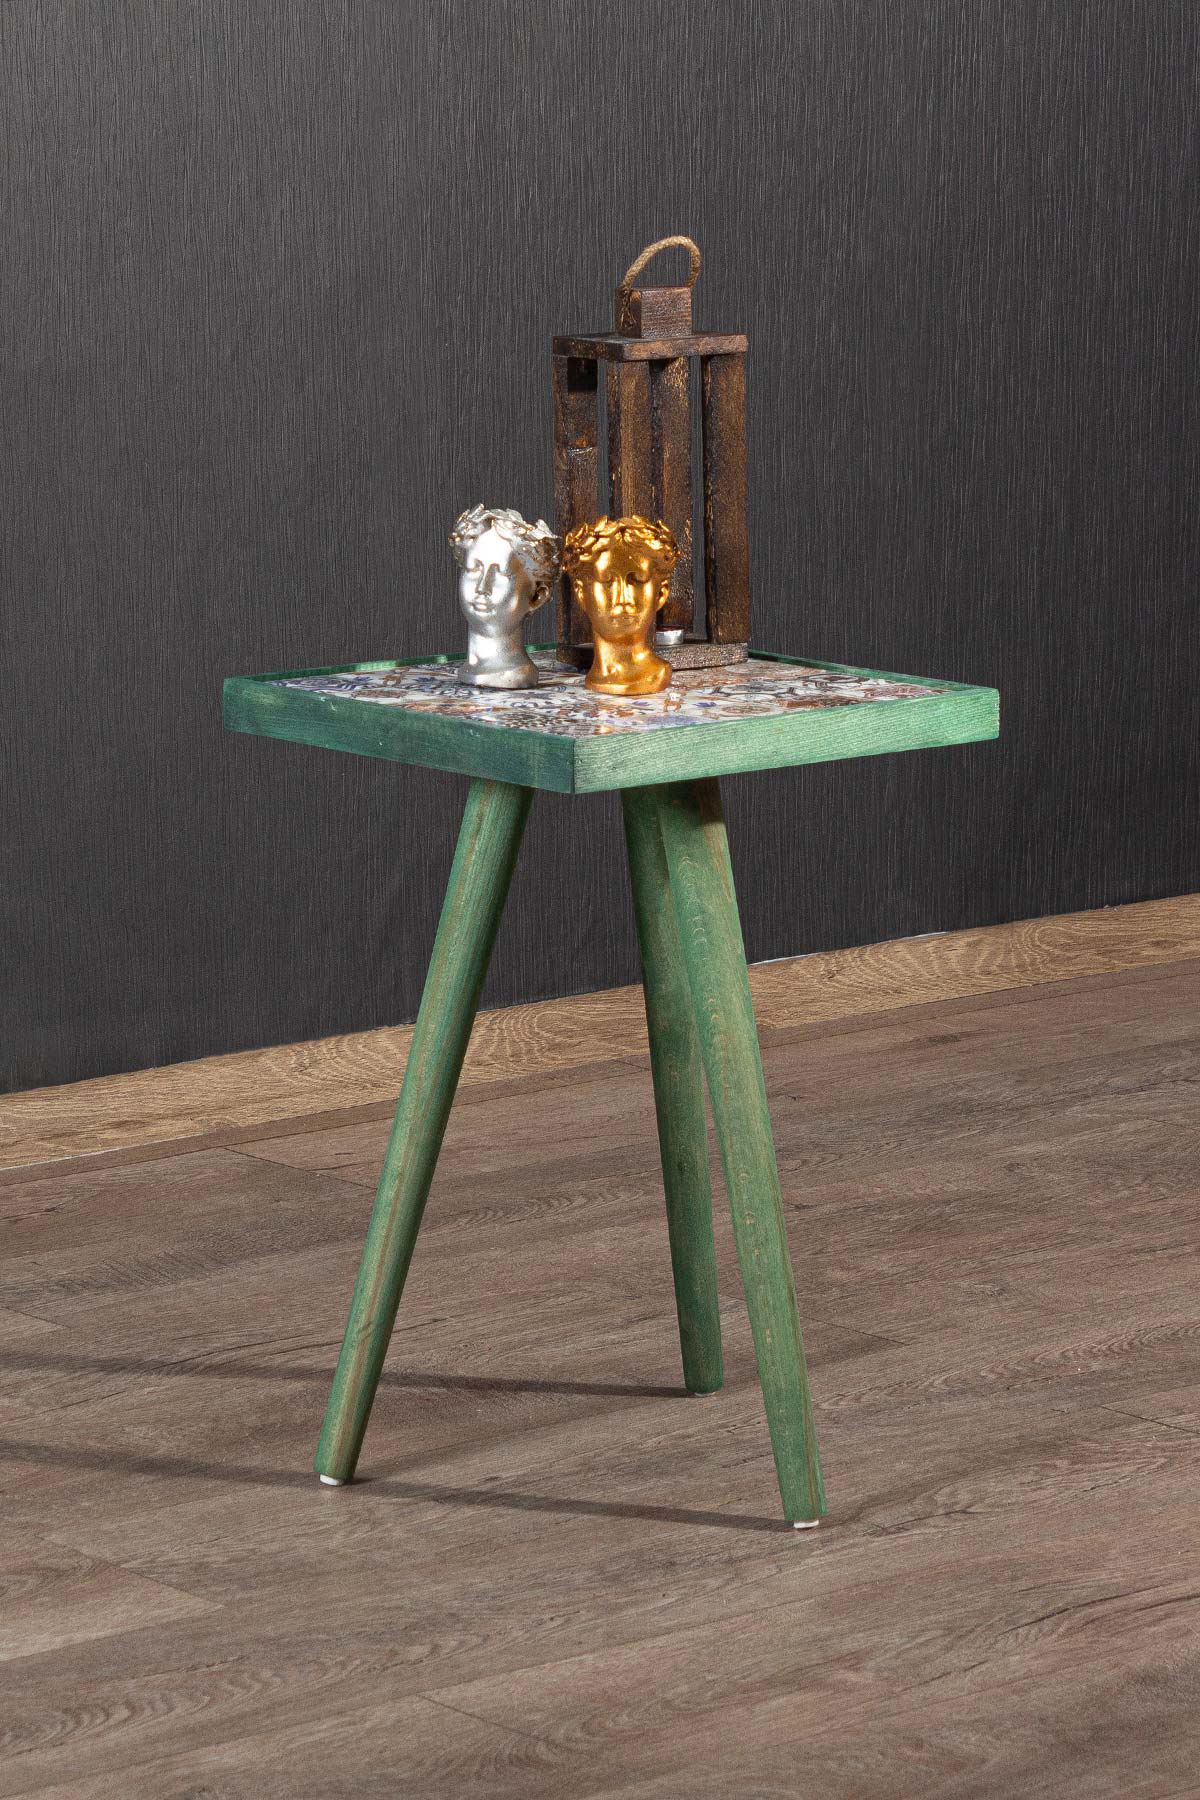 Bofigo Wooden Tile Center Table Wooden Solid Wood Table 32x32 Cm Green